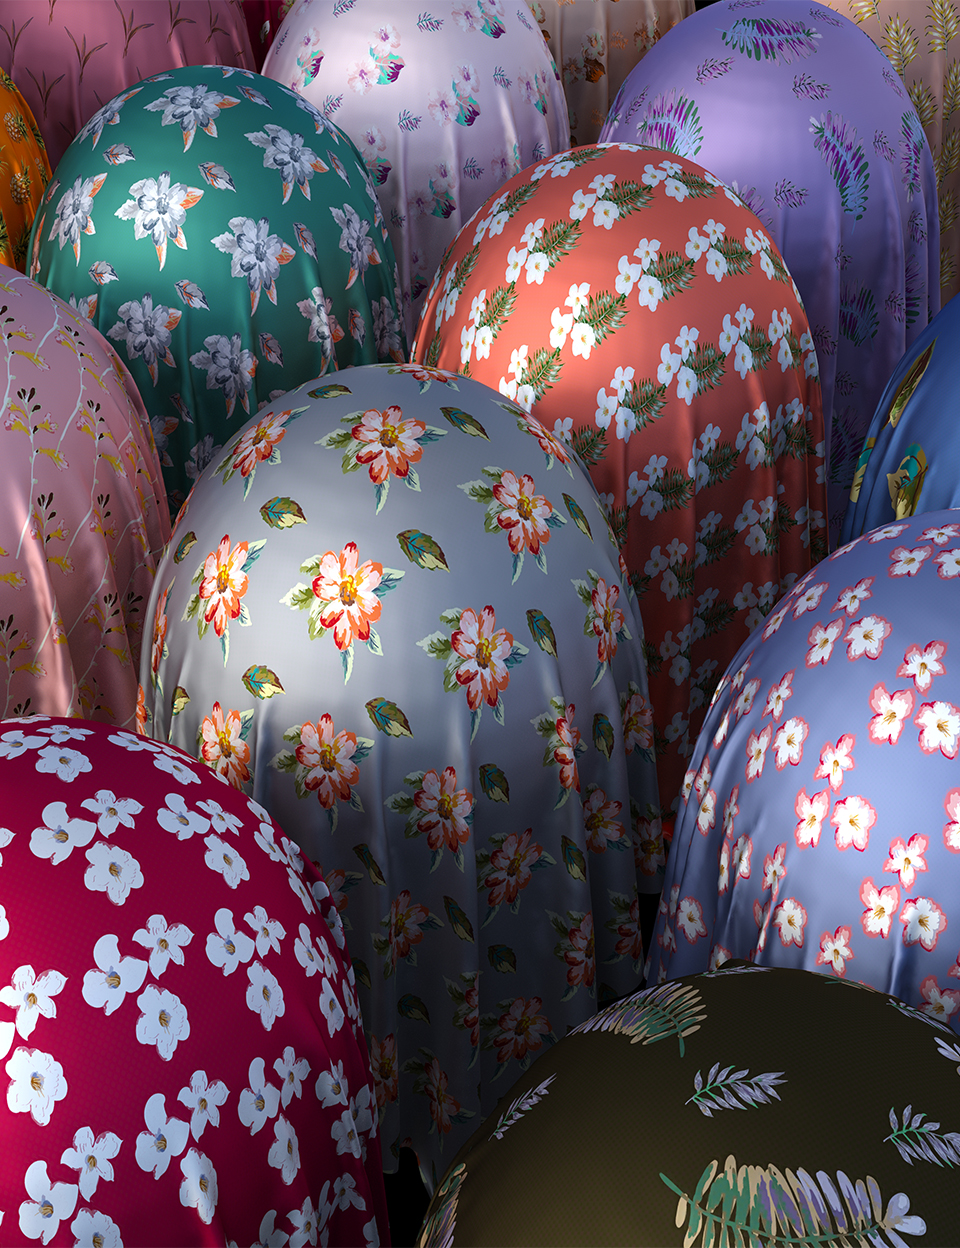 Floral Silk Fabric Iray Shaders by: Nelmi, 3D Models by Daz 3D